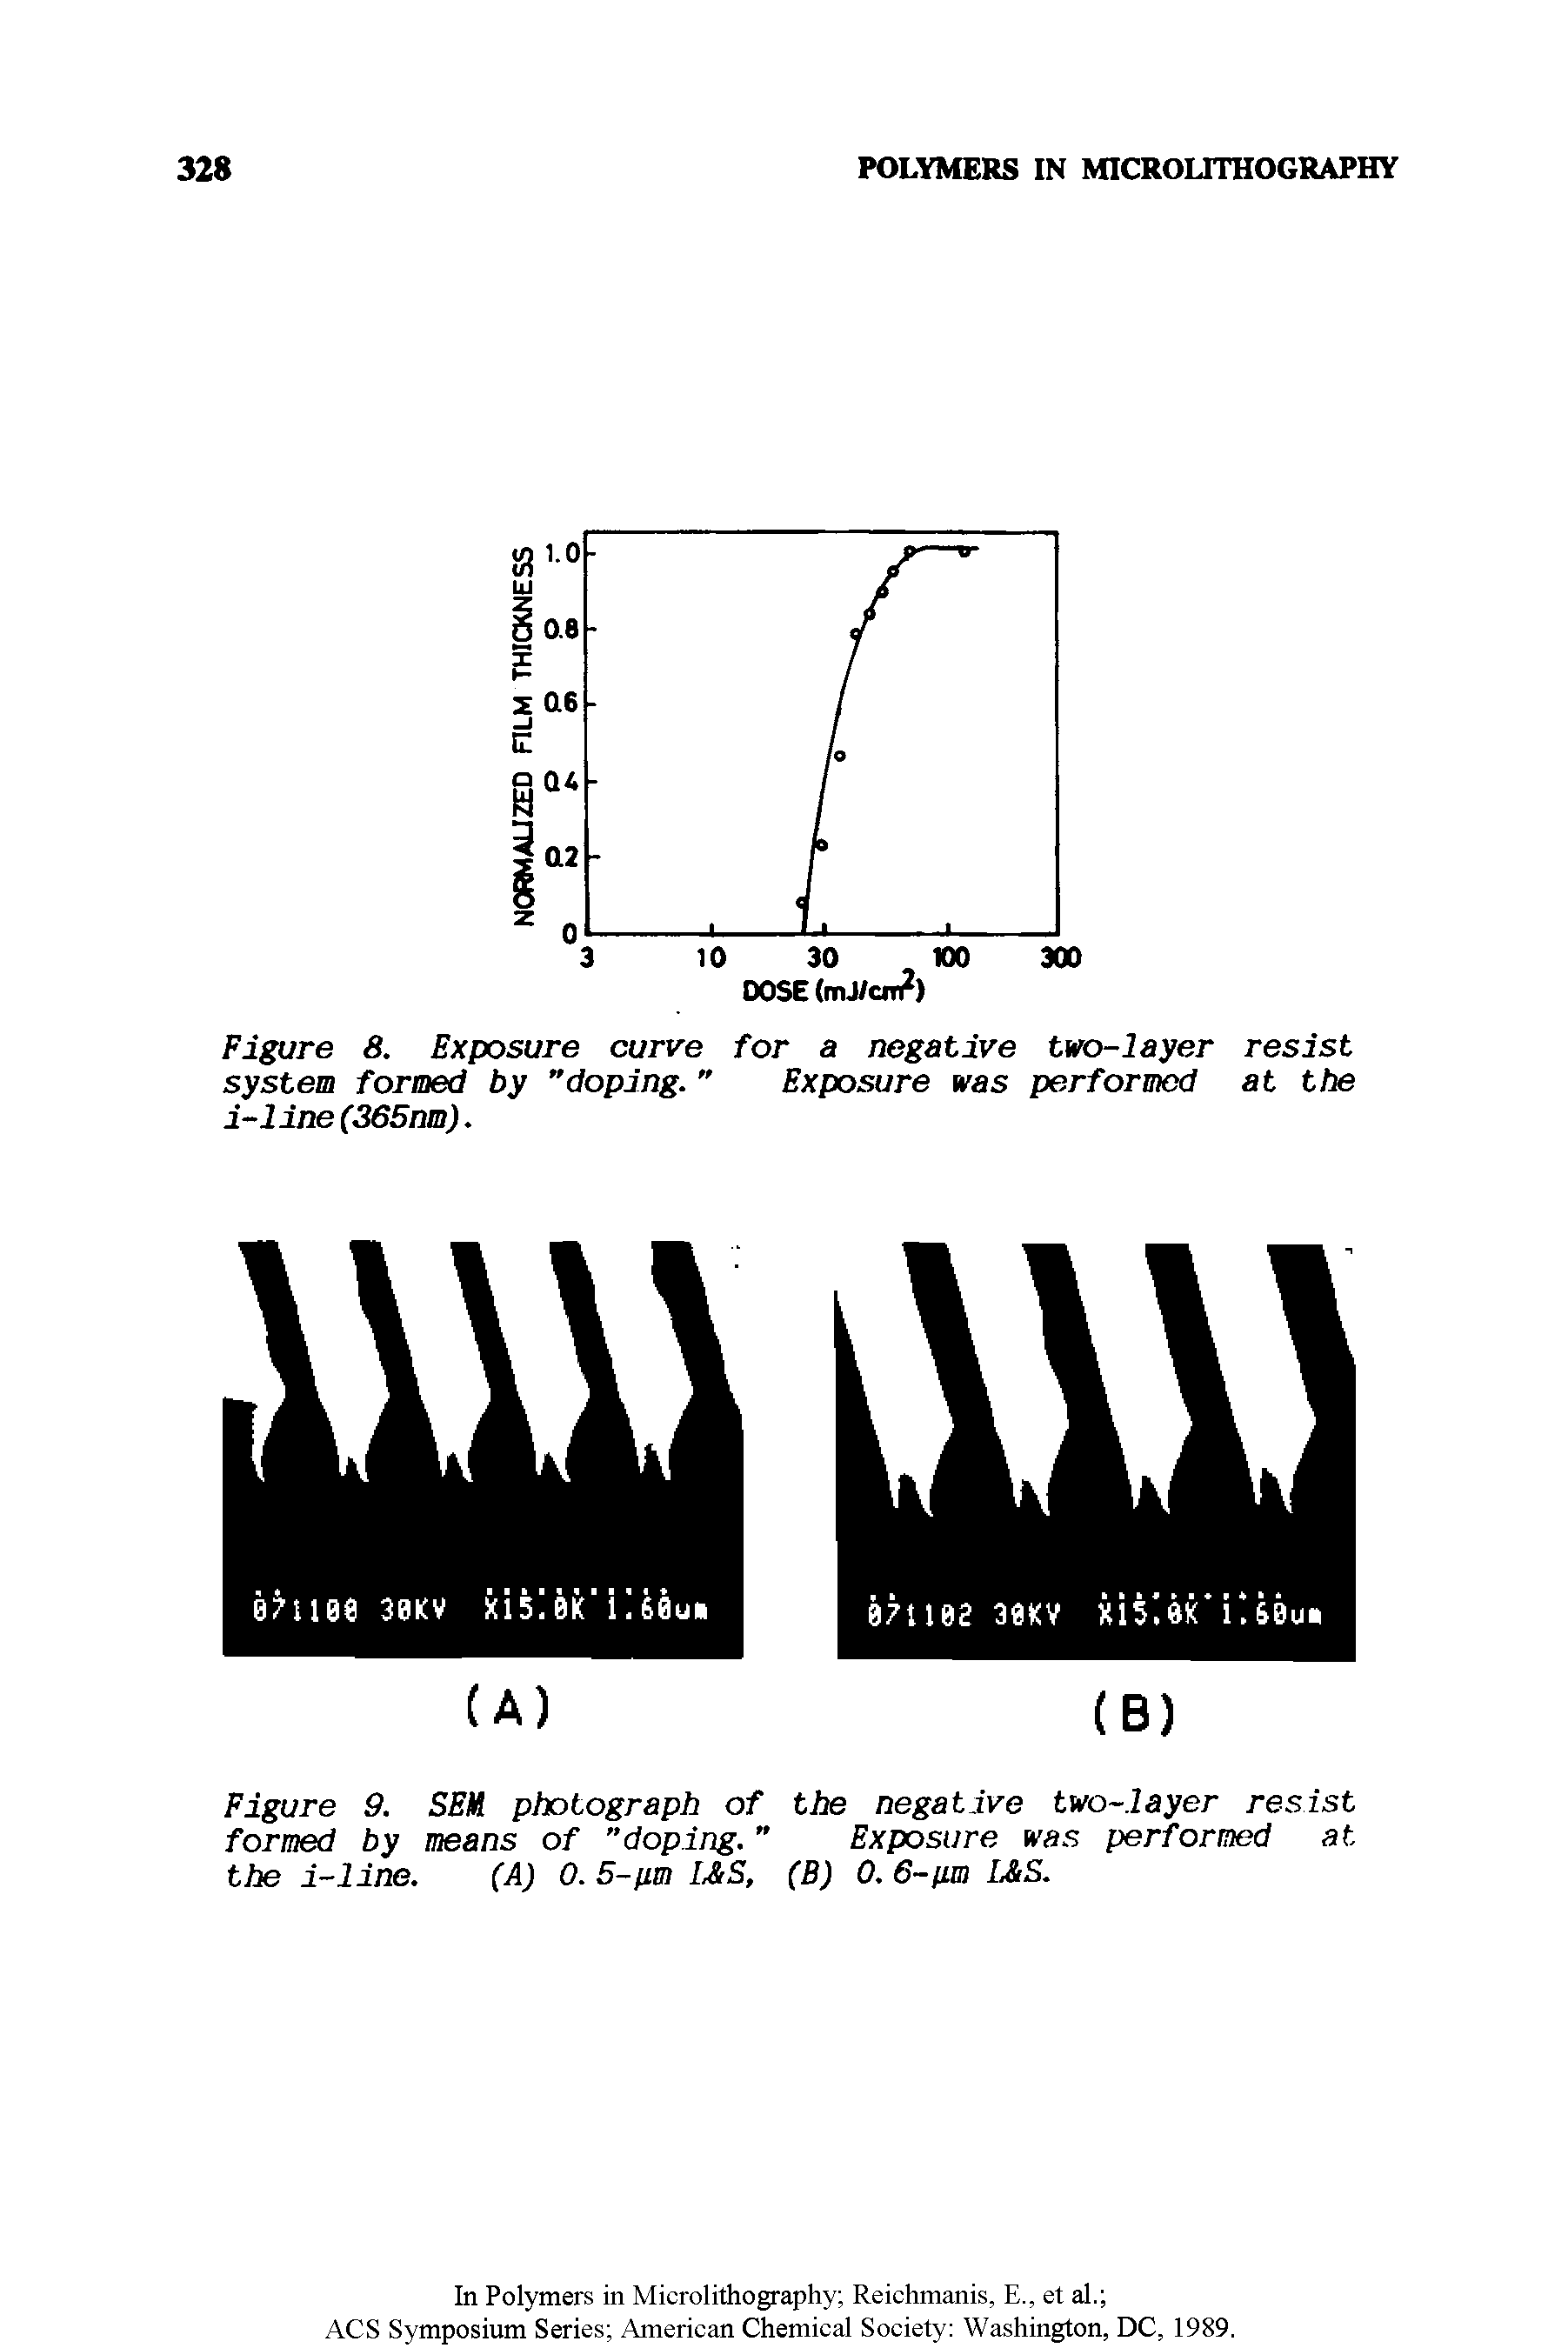 Figure 8. Exposure curve for a negative two-layer resist system formed by doping. Exposure was performed at the i-line(365nm).